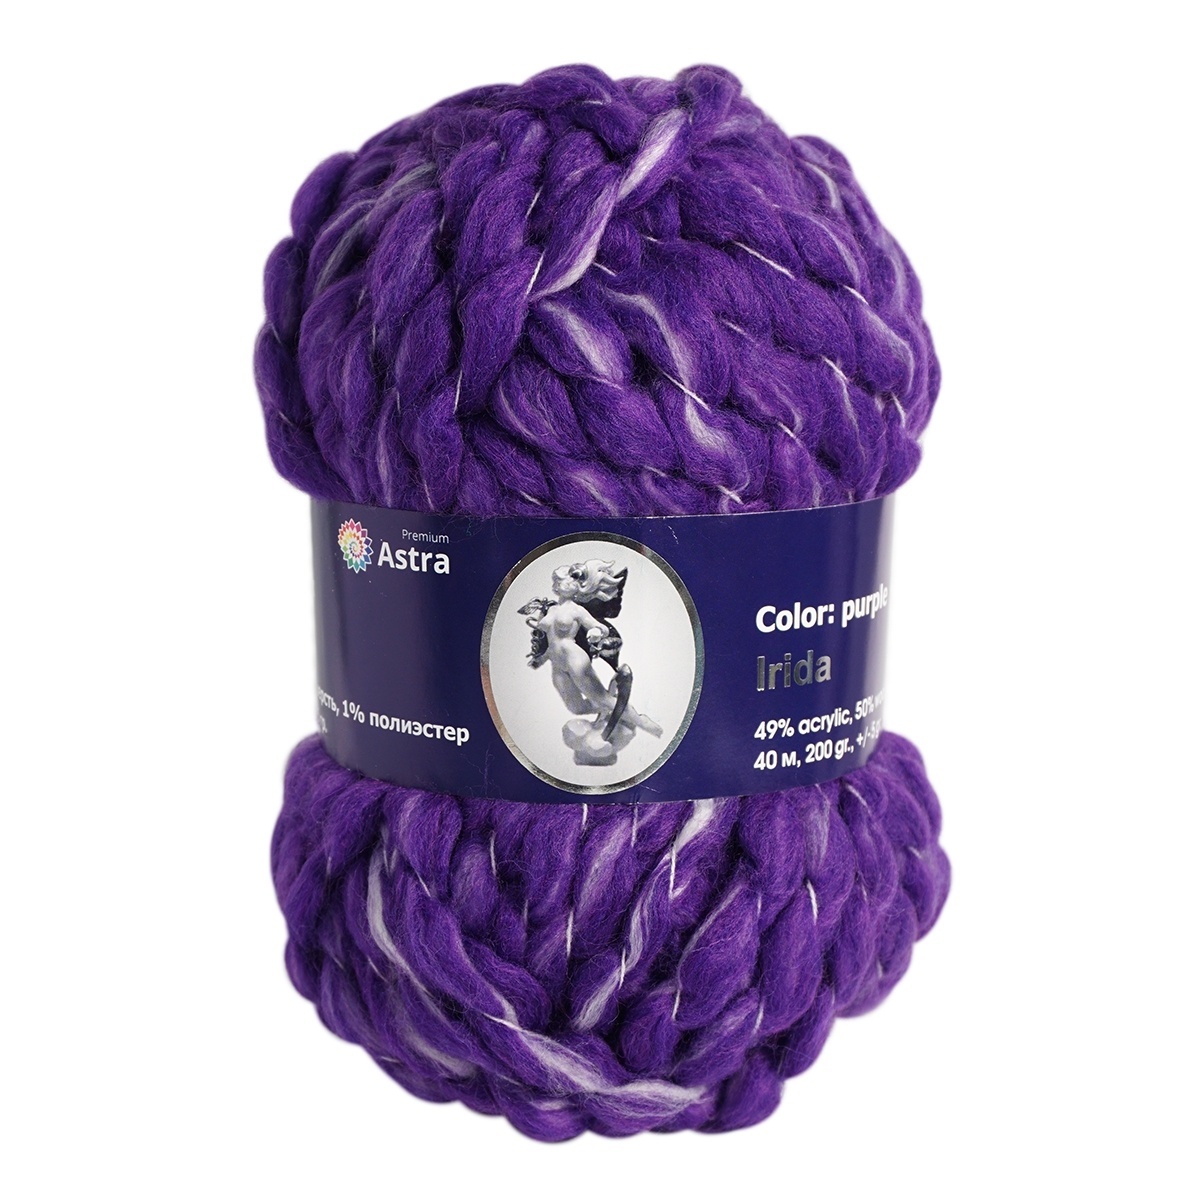 Astra Premium Iris, 50% wool, 49% acrylic, 1% polyester, 2 Skein Value Pack, 400g фото 8